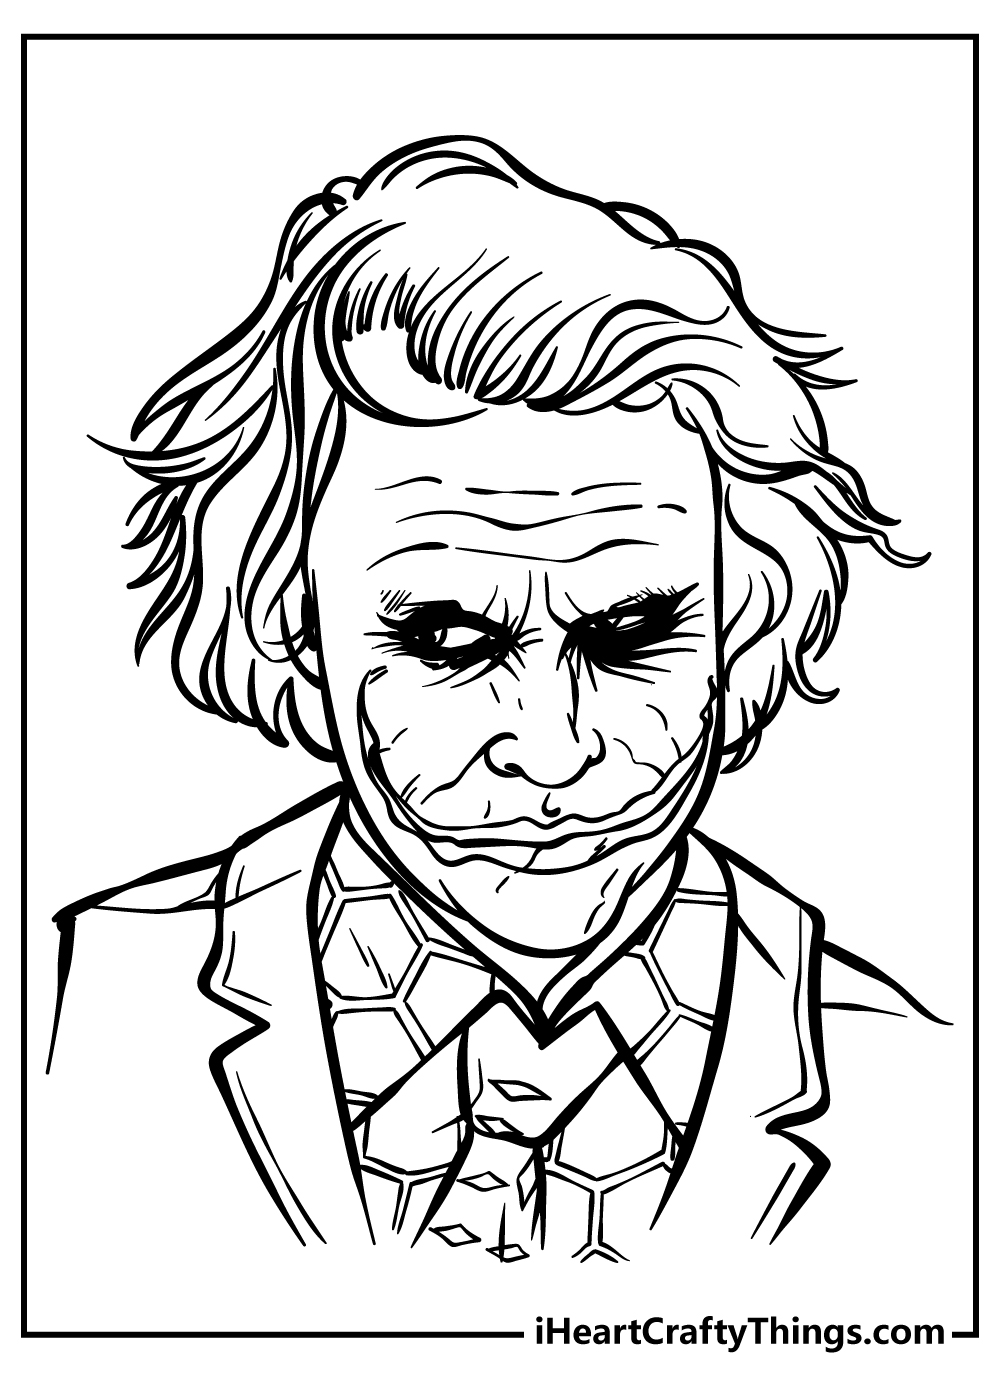 Joker Coloring Book for adults free download